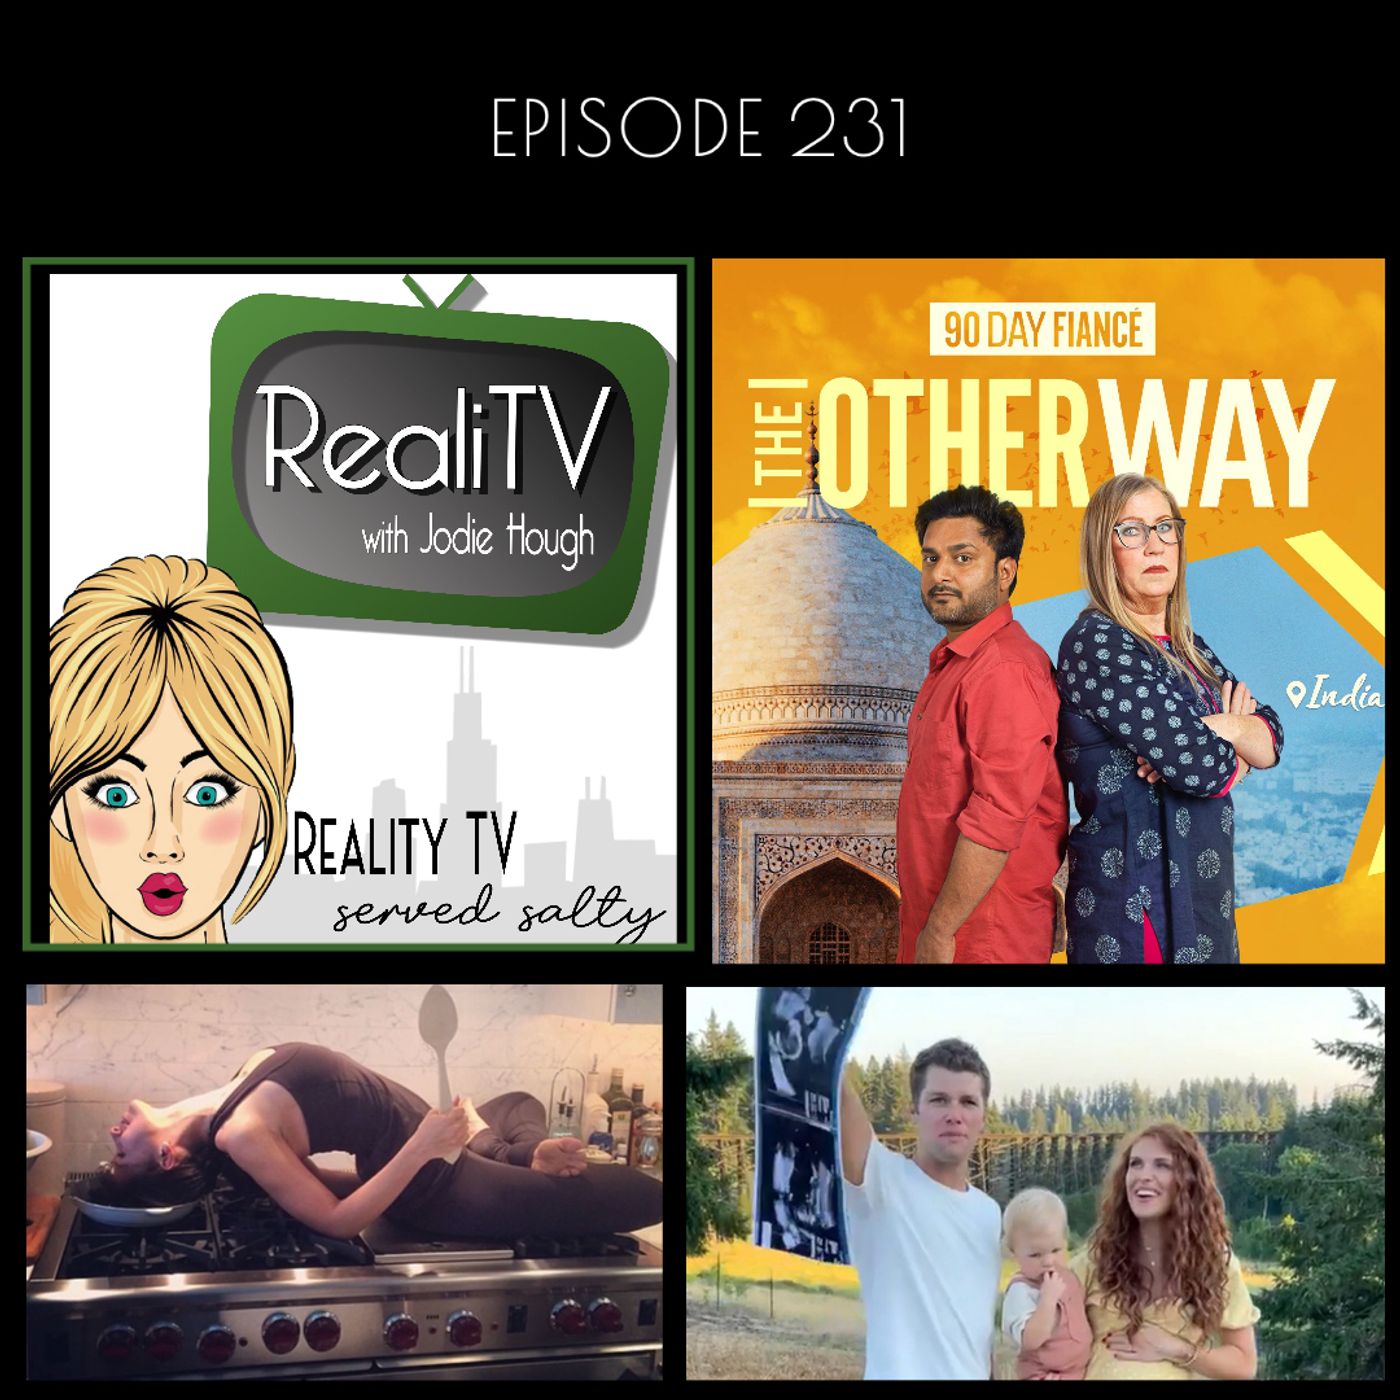 231: Hilaria, 90 Day Fiance, and the 3rd Coming of Roloff